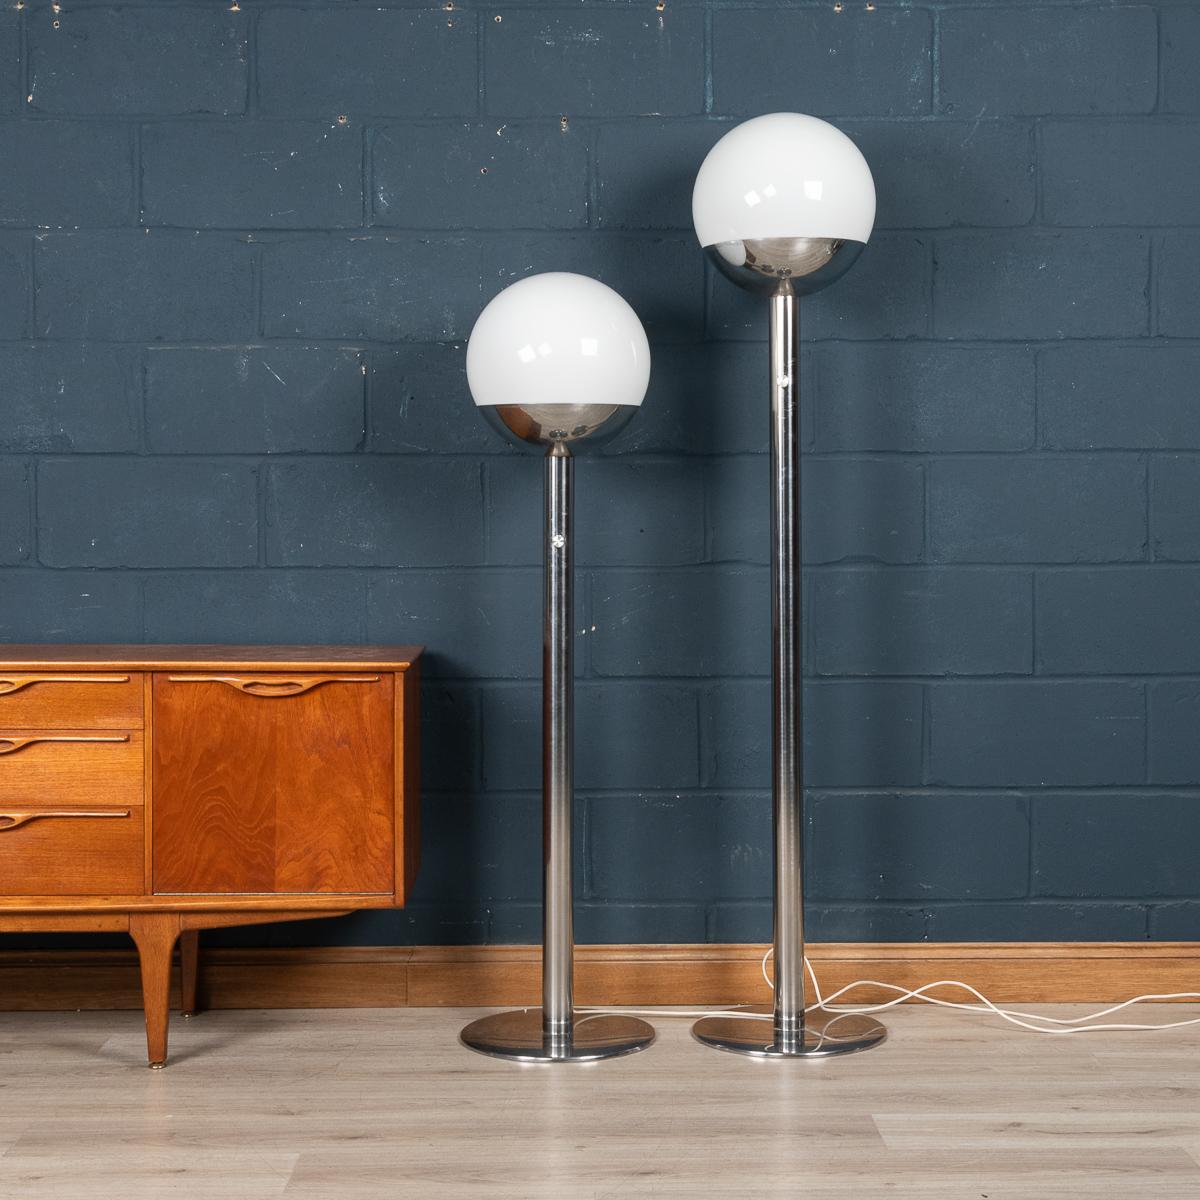 Graduated Pair Of Floor Lamps, Pia Guidetti-Crippa For Luci Italia, c.1970 In Good Condition For Sale In Royal Tunbridge Wells, Kent